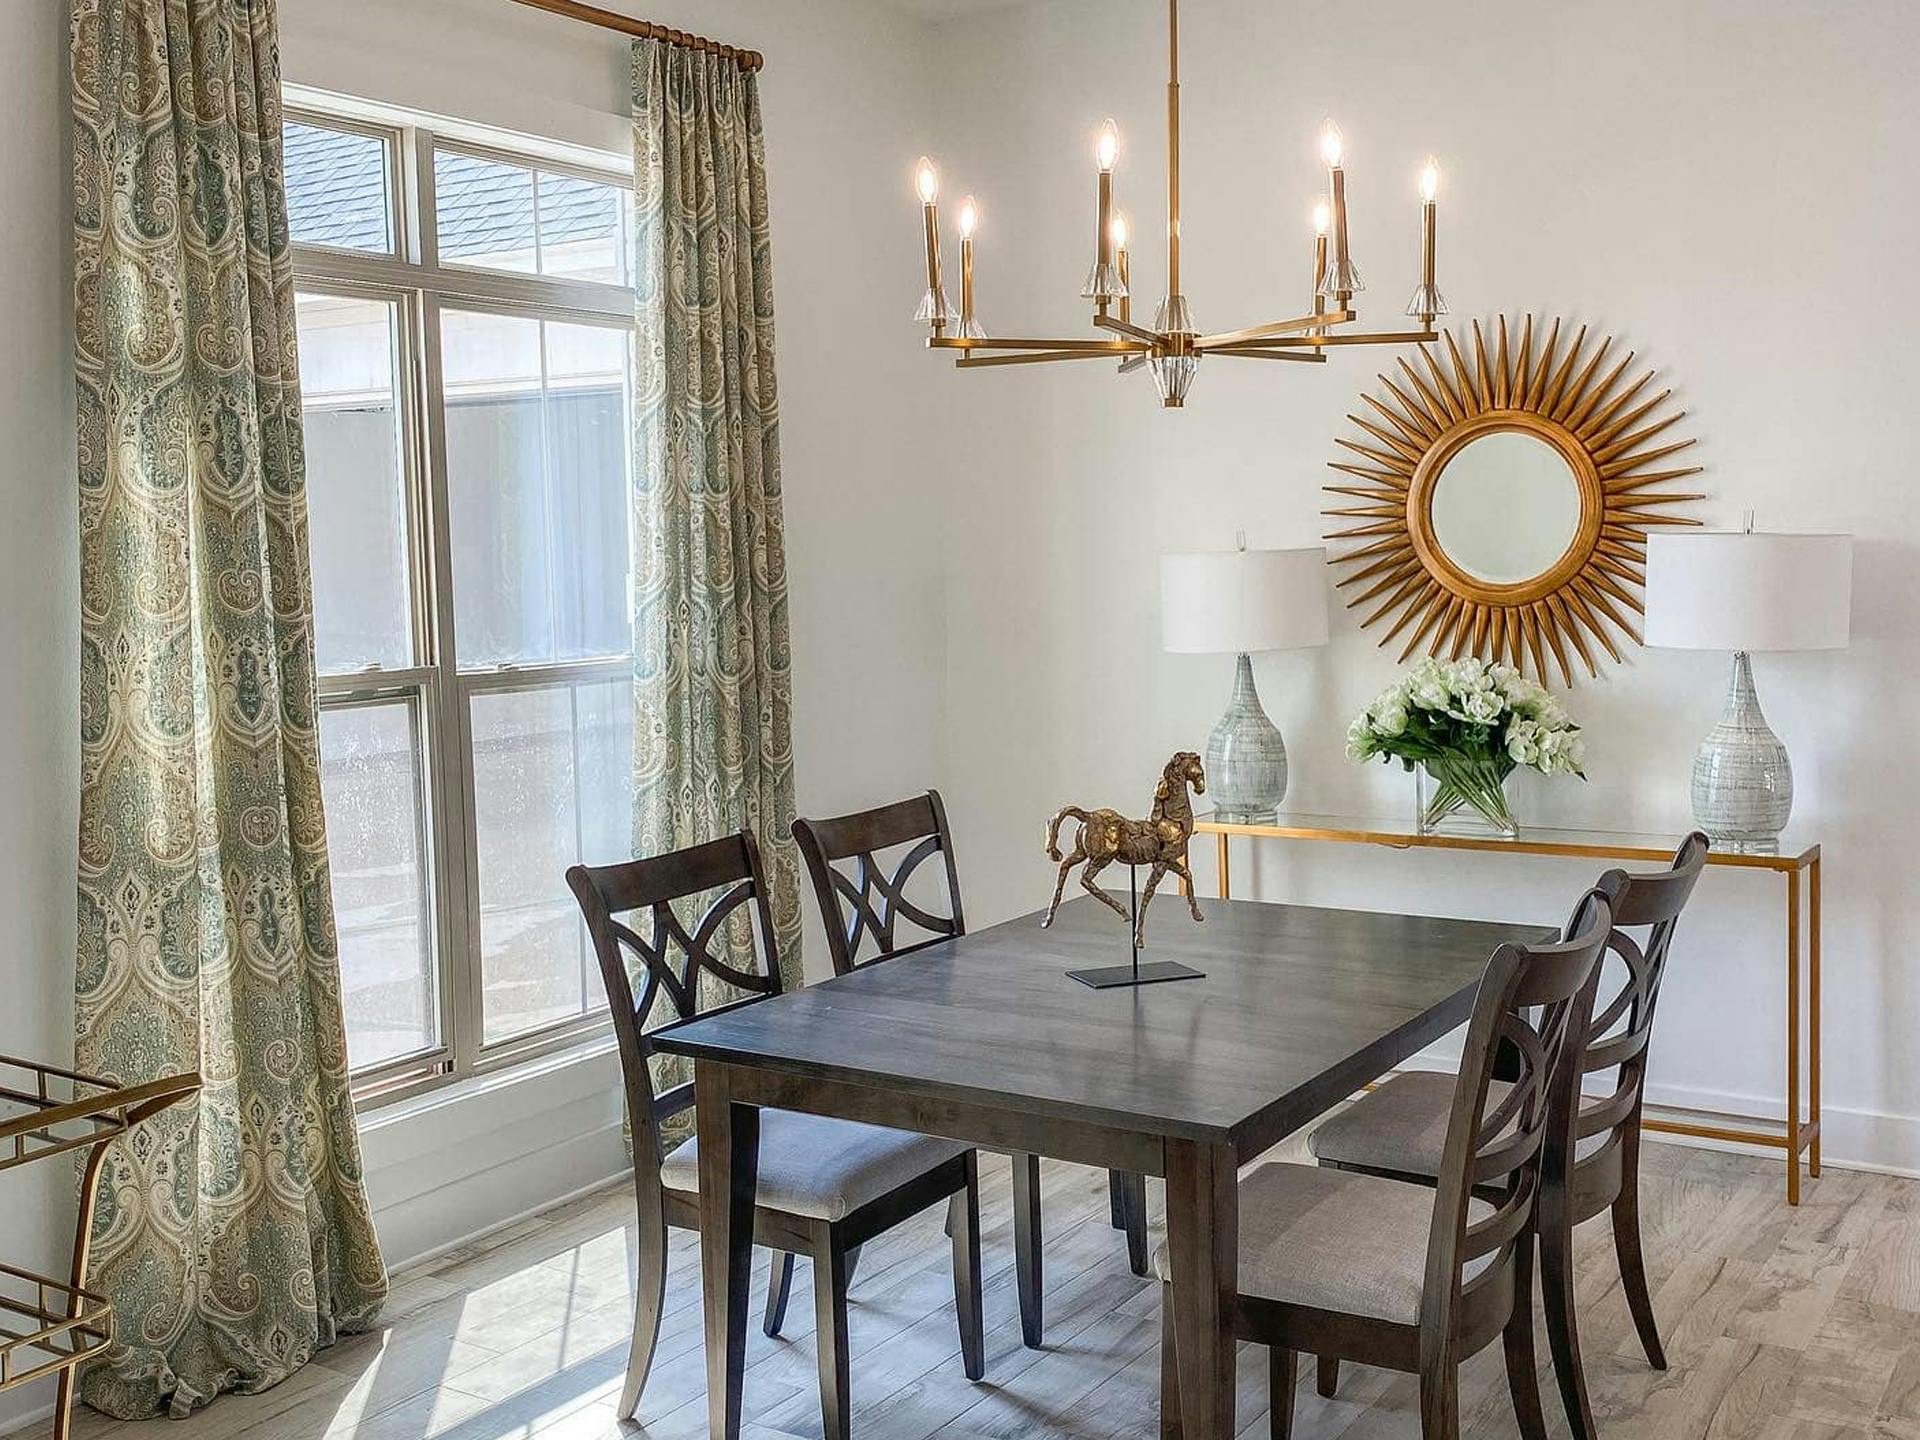 Dining room table with Kichler chandelier hanging overhead